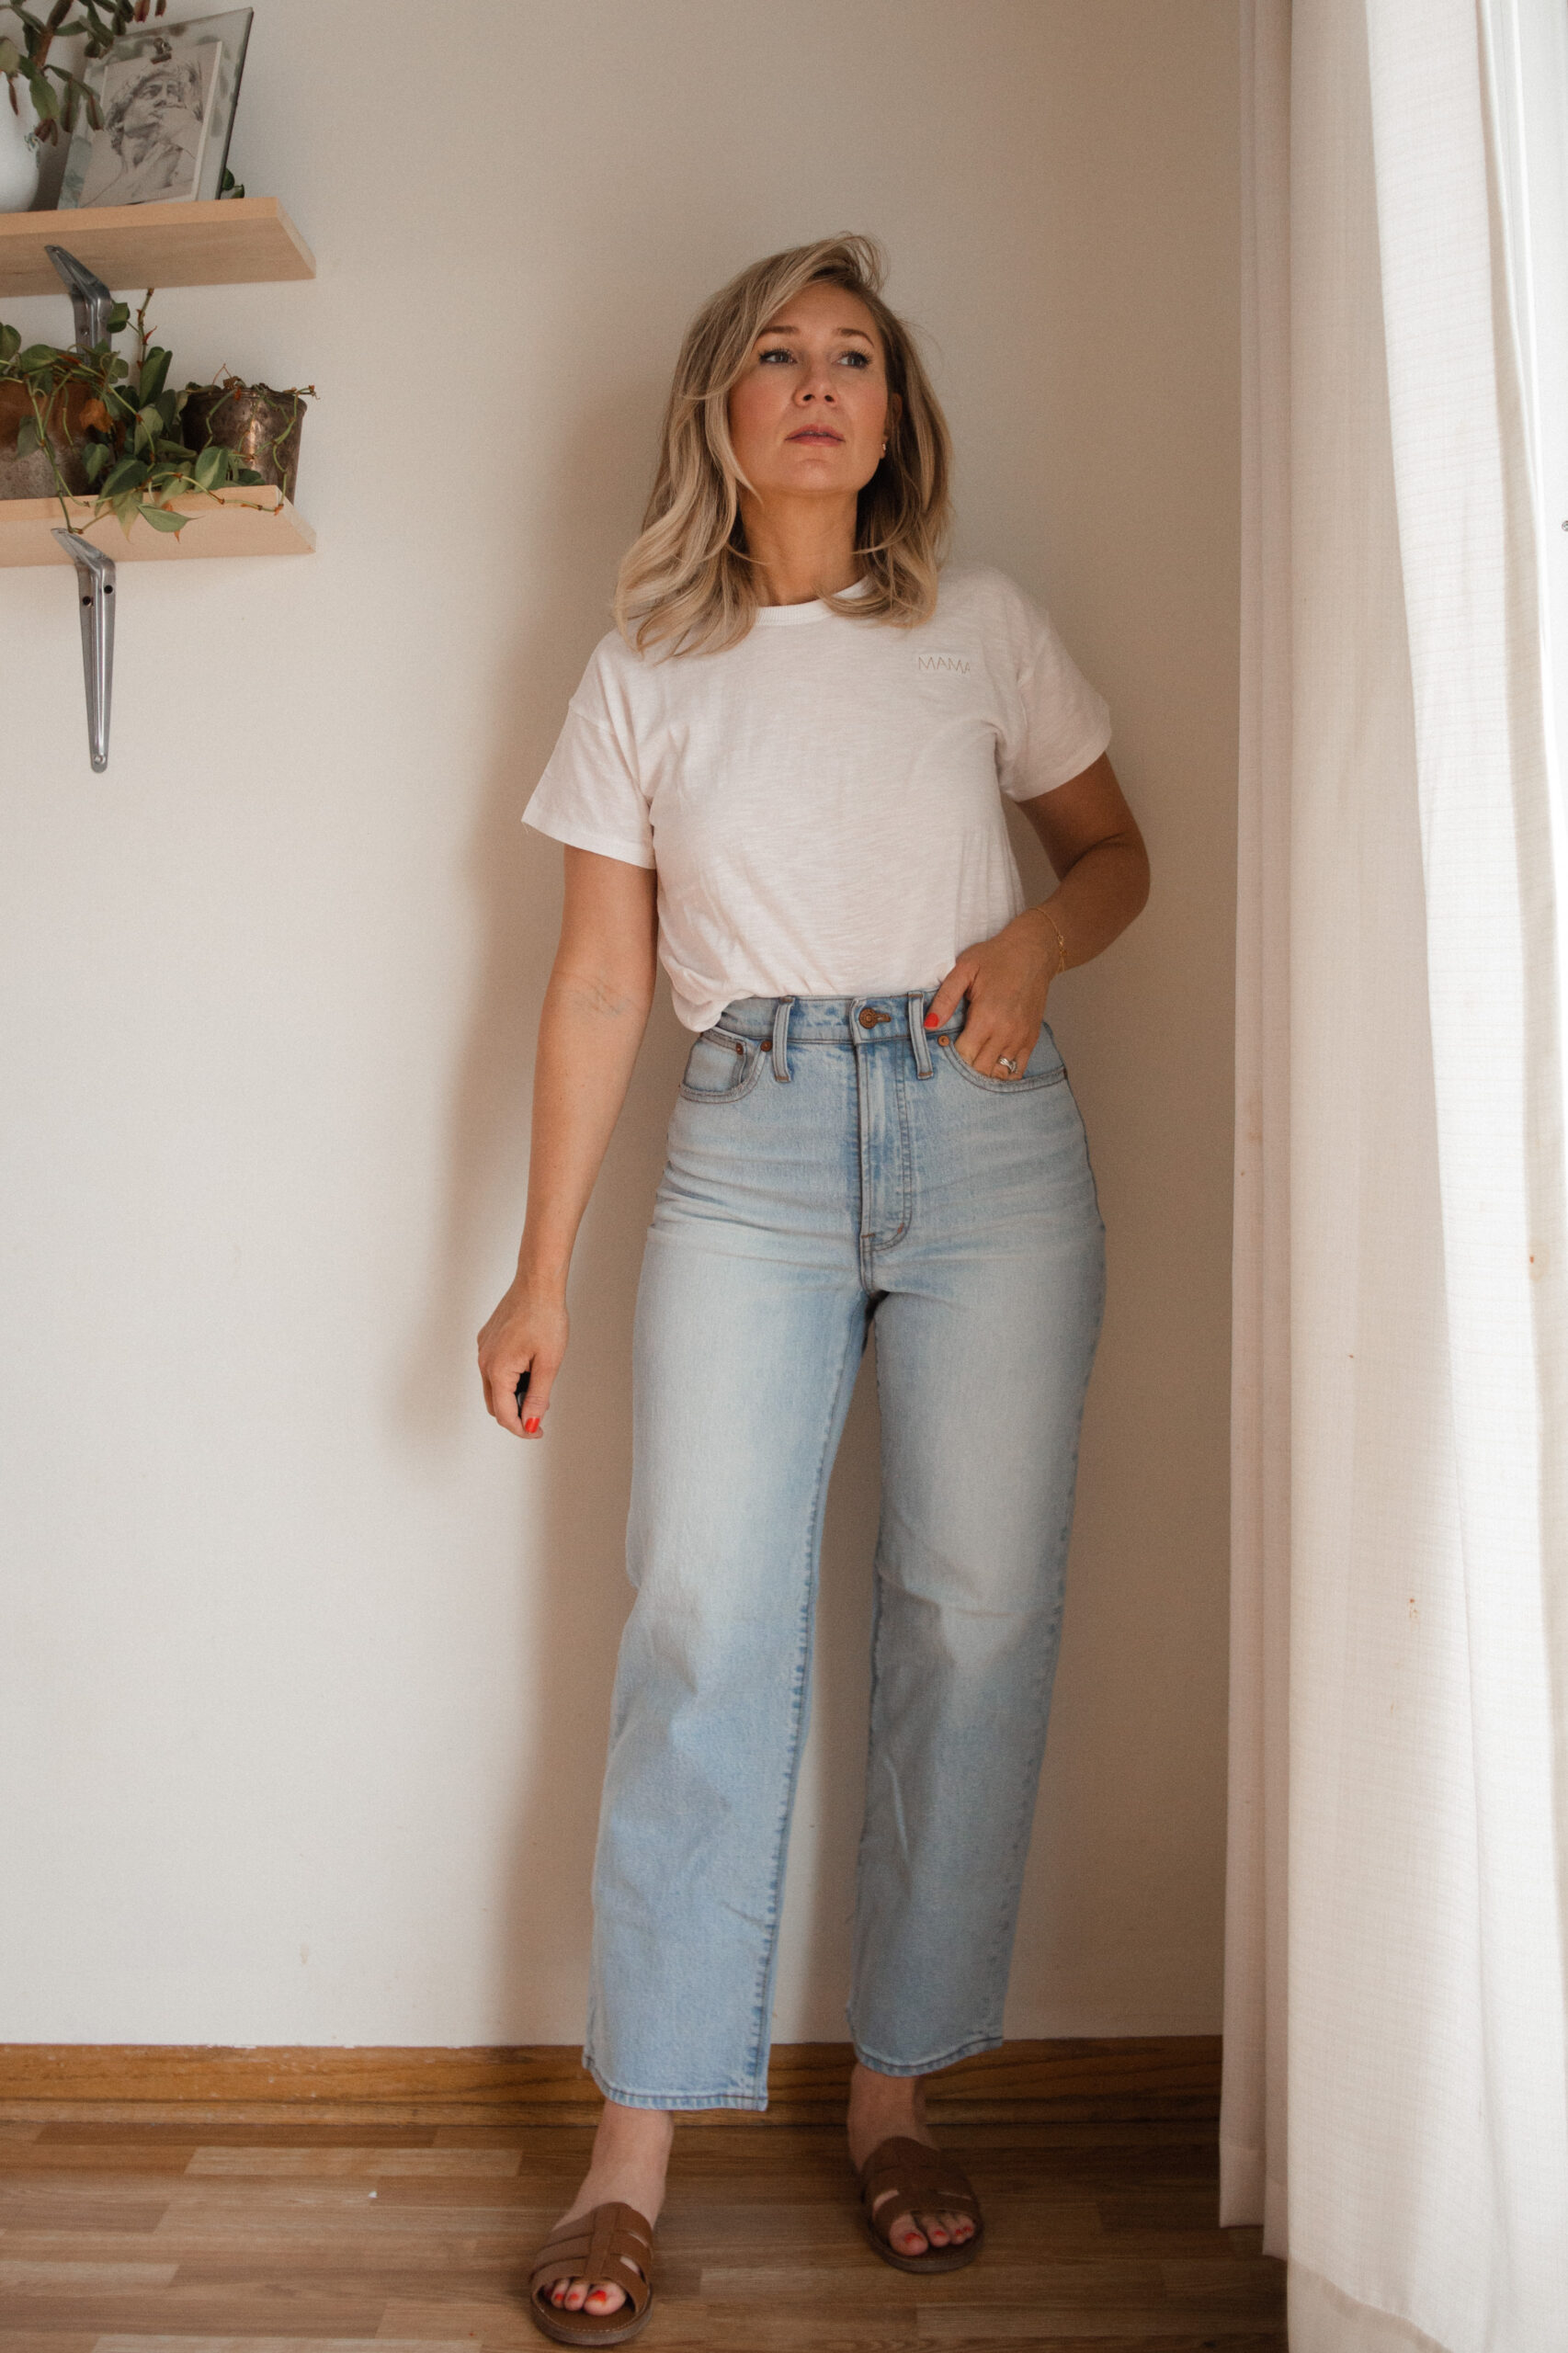 Karin Emily wears and reviews the Madewell perfect vintage wide leg jeans in her very detailed Madewell Denim Guide